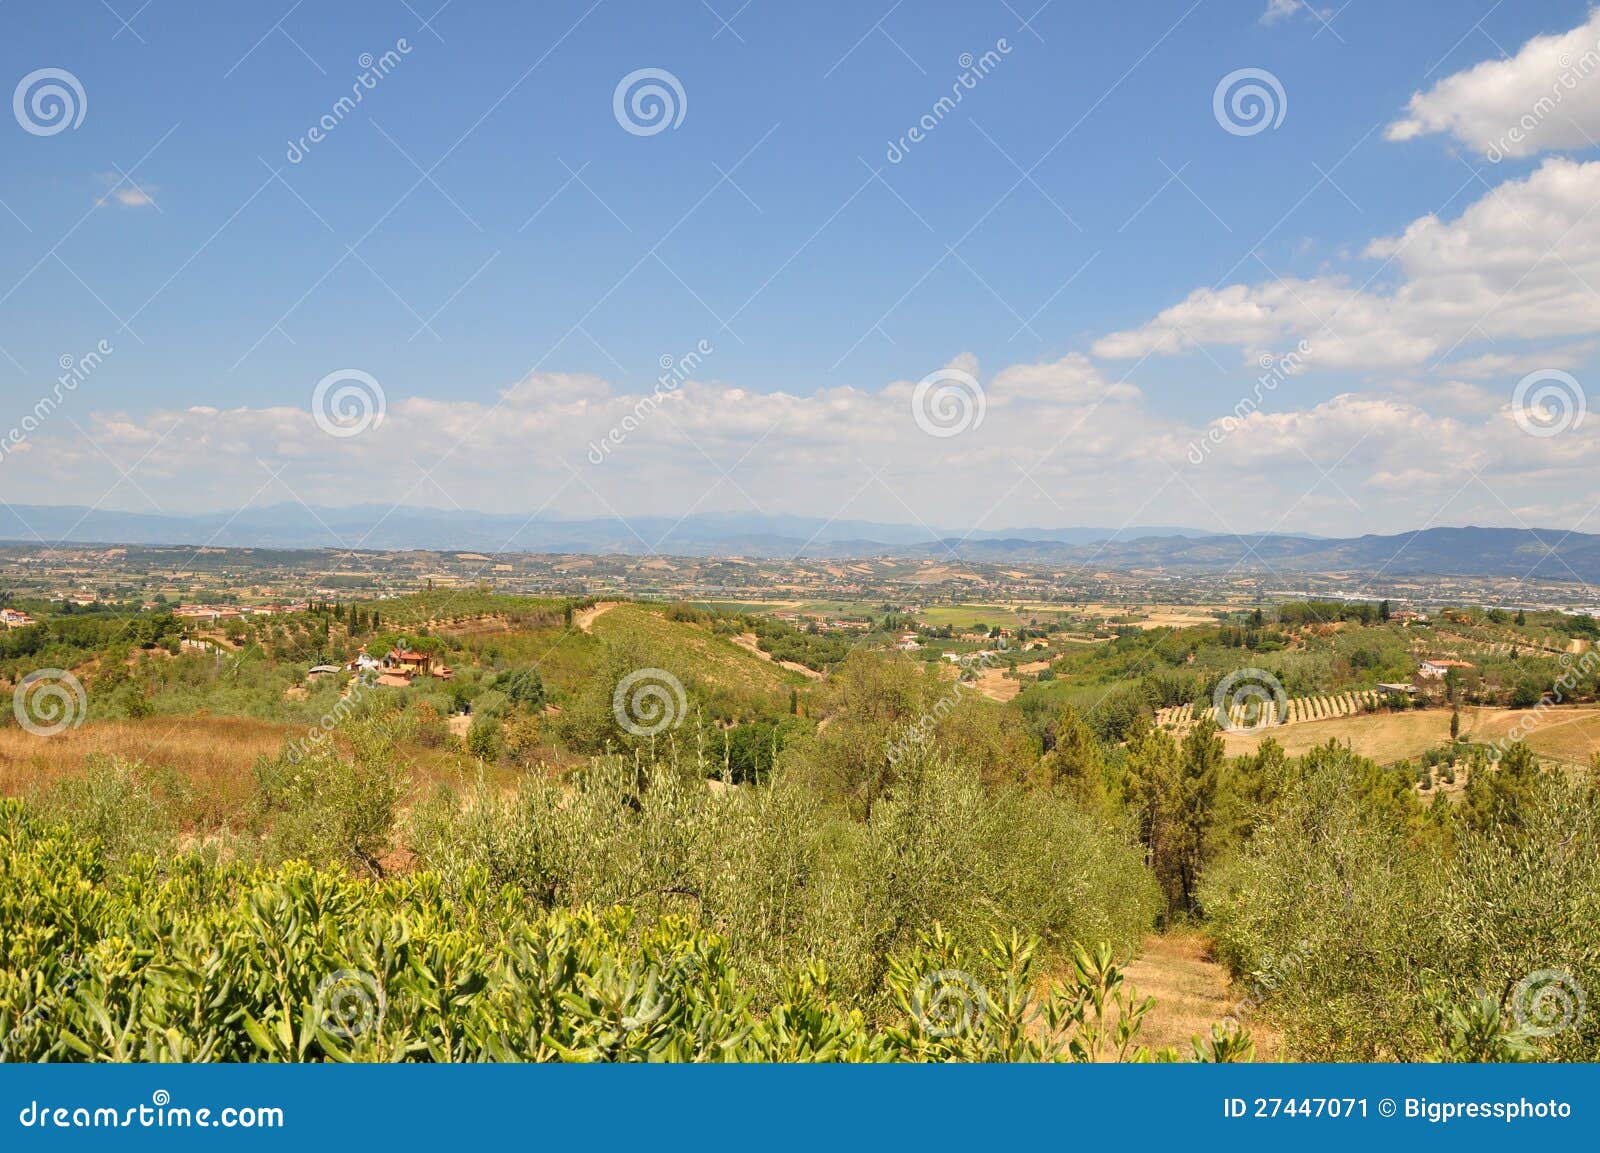 province of pisa italy countryside